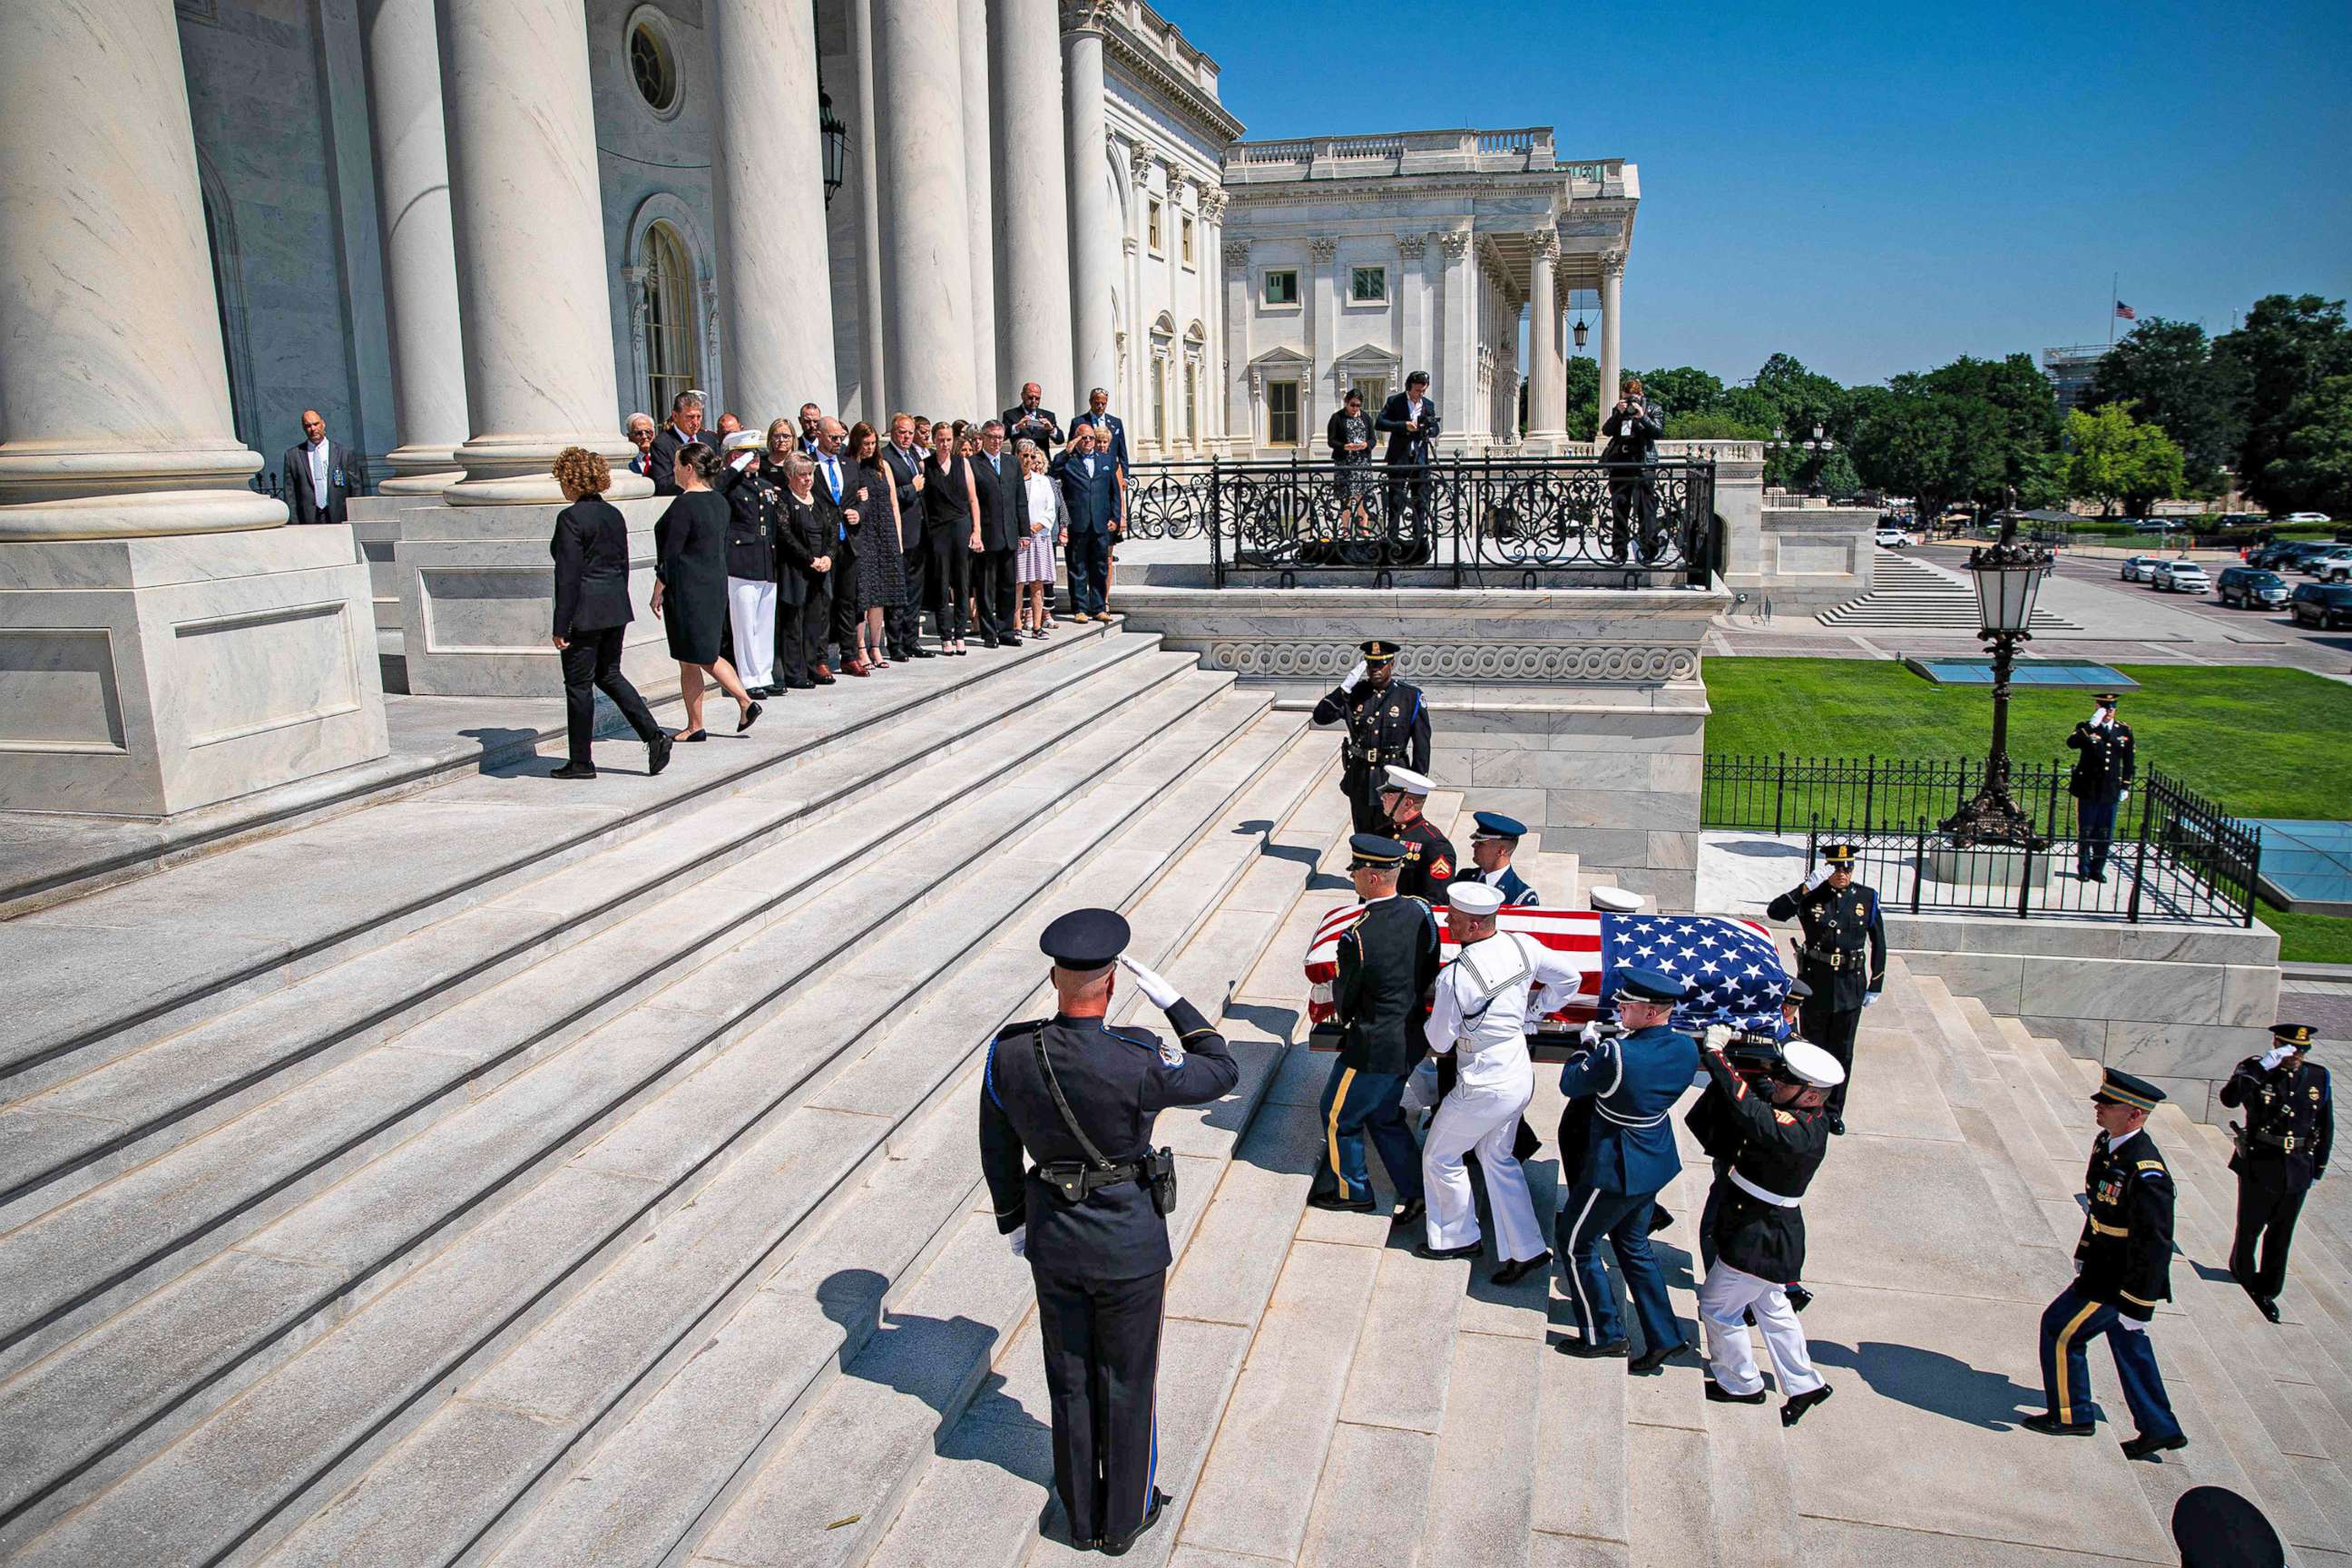 PHOTO: The flag-draped casket bearing the remains of Hershel W. Williams is carried by joint service members into the U.S. Capitol, to lie honor, on July 14, 2022 in Washington, D.C.